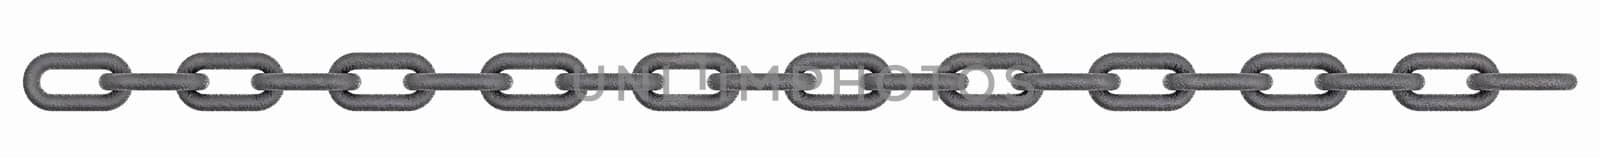 3d render of a metal chain isolated on a white background